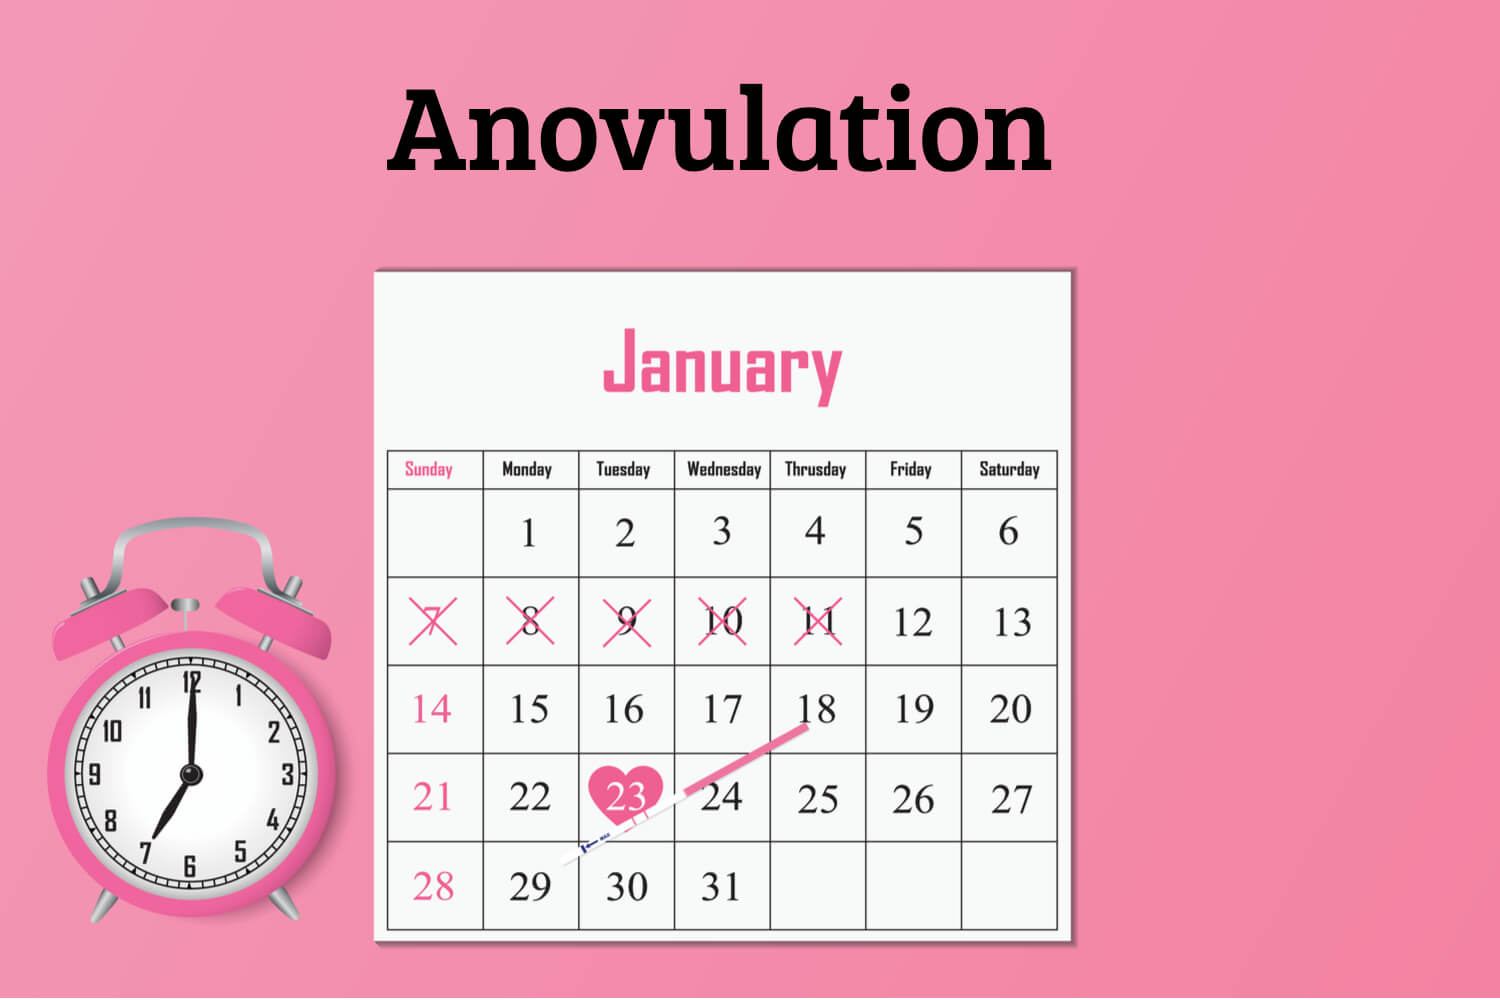 Anovulation- Causes, Symptoms, and Remedies